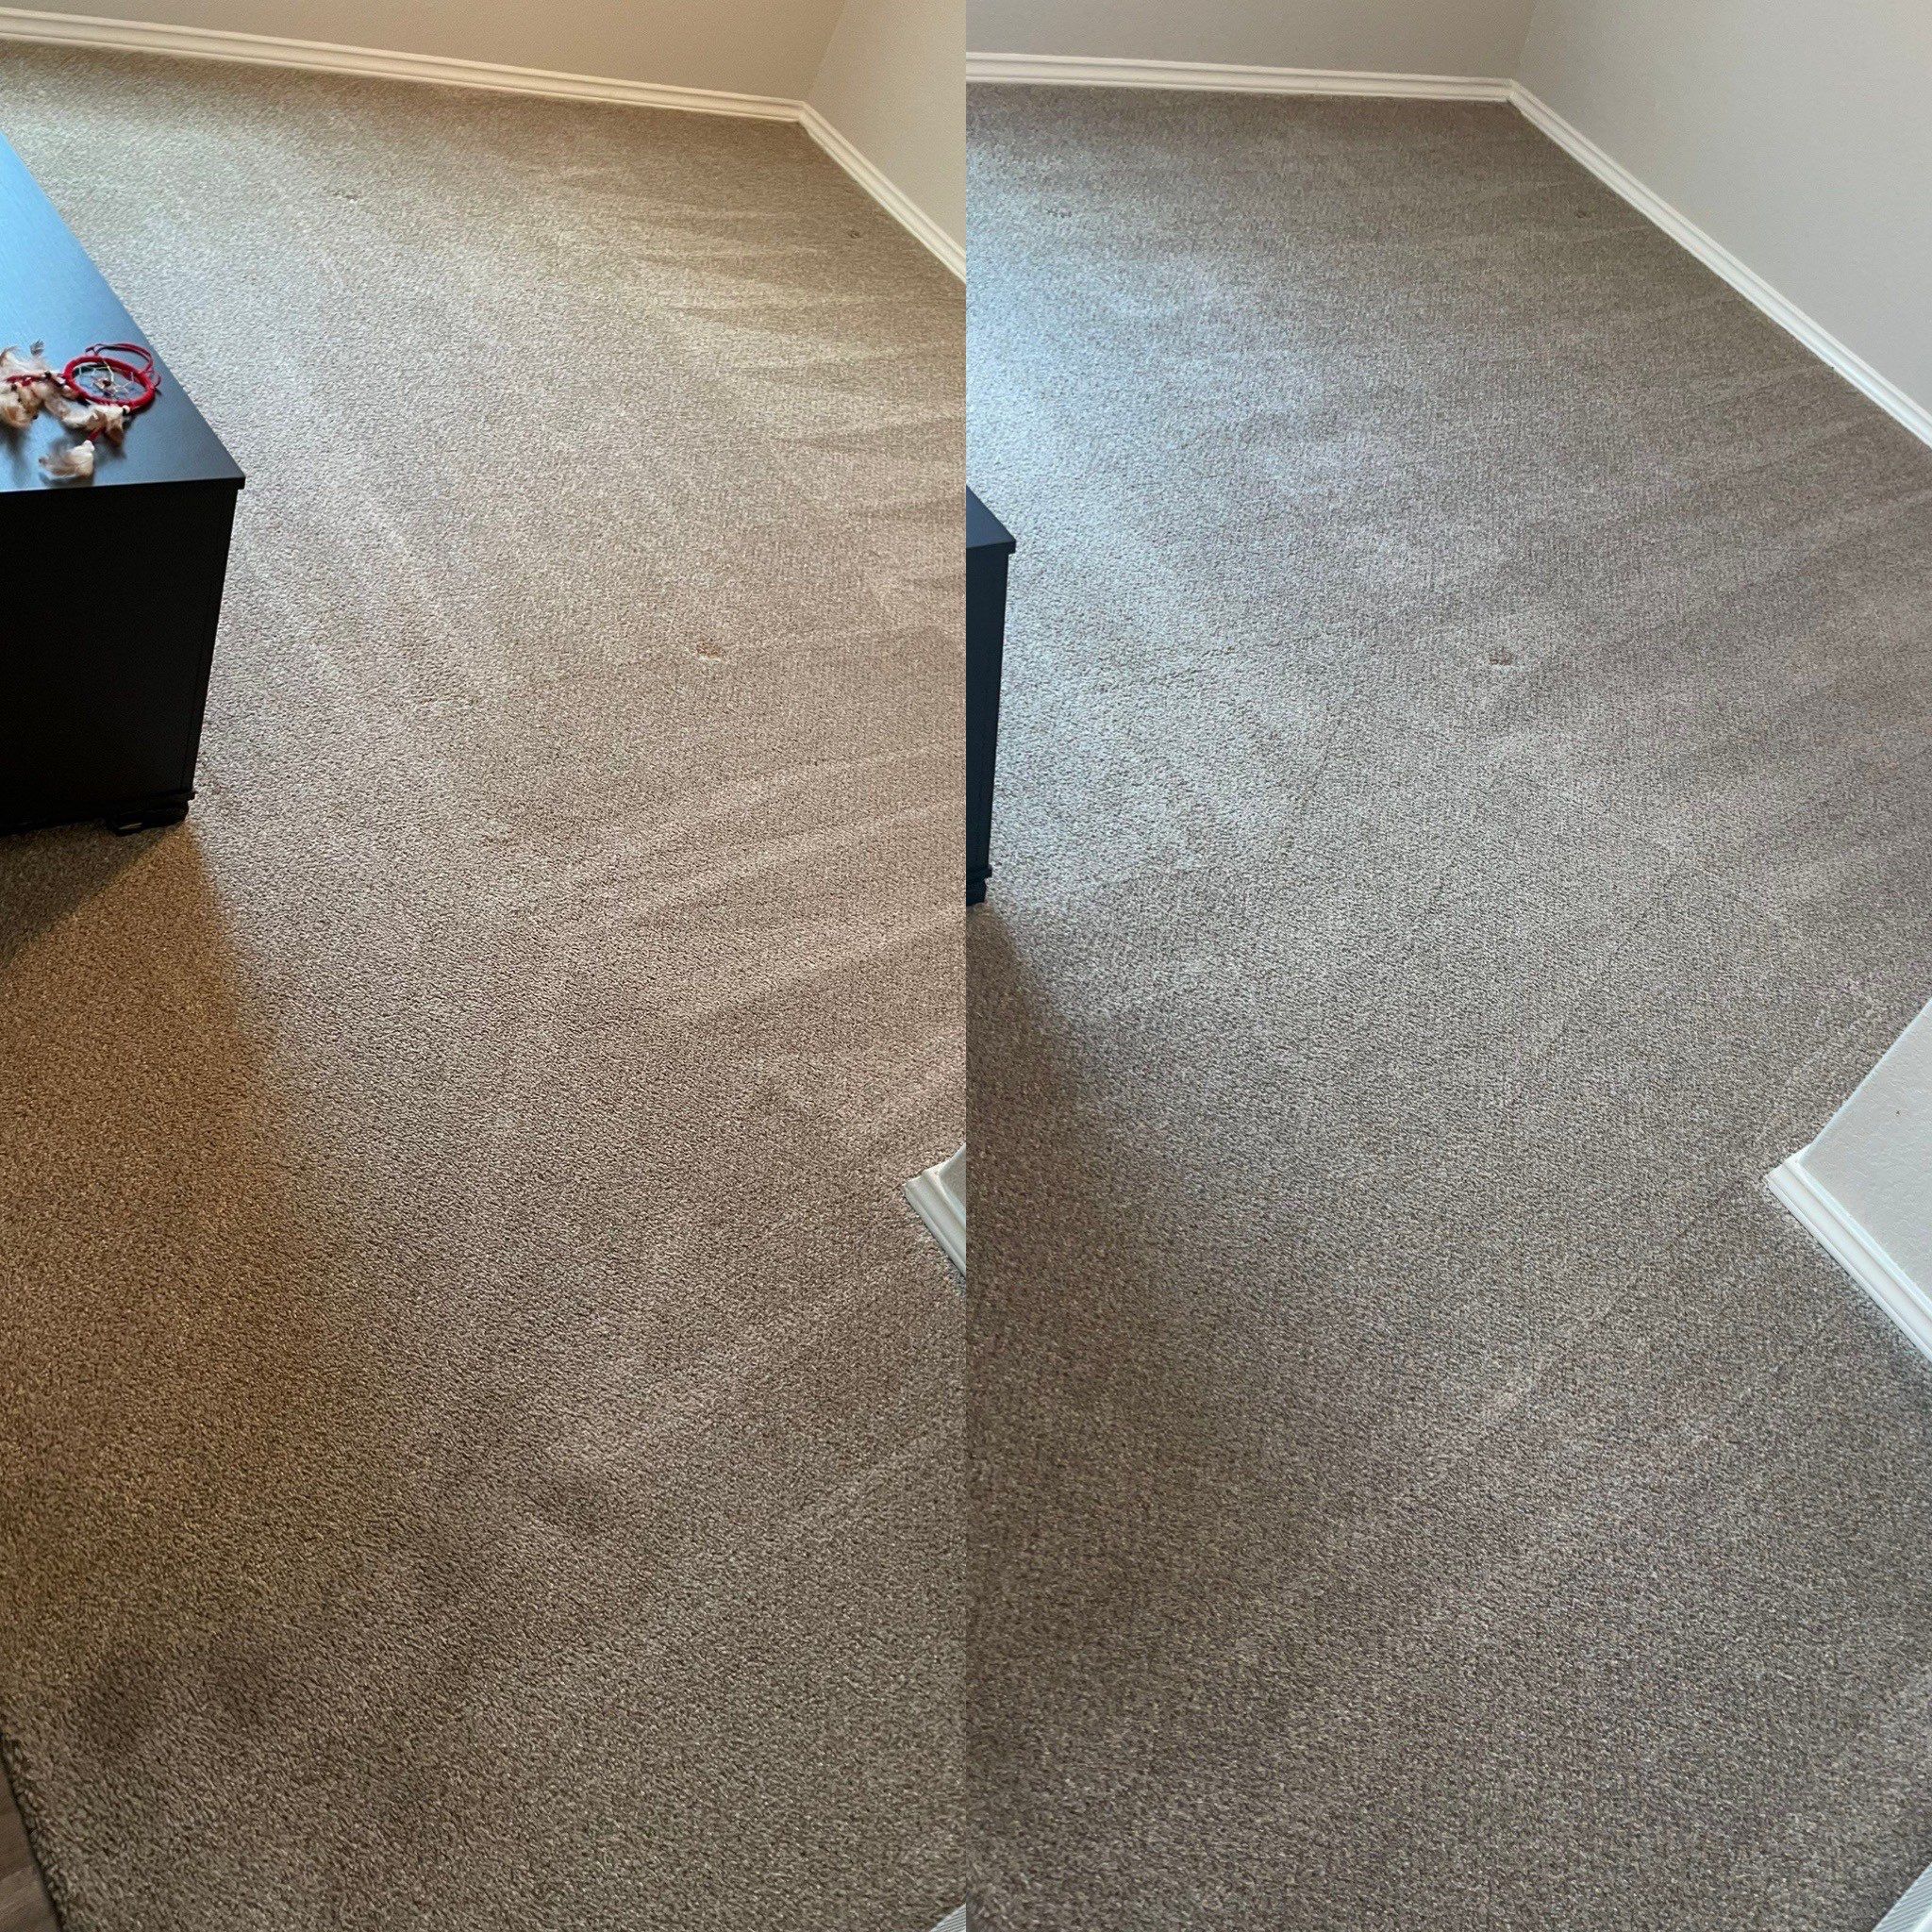 carpet cleaning company in san antonio cleaning and refreshing room carpet before and after comparison showing cleaner results